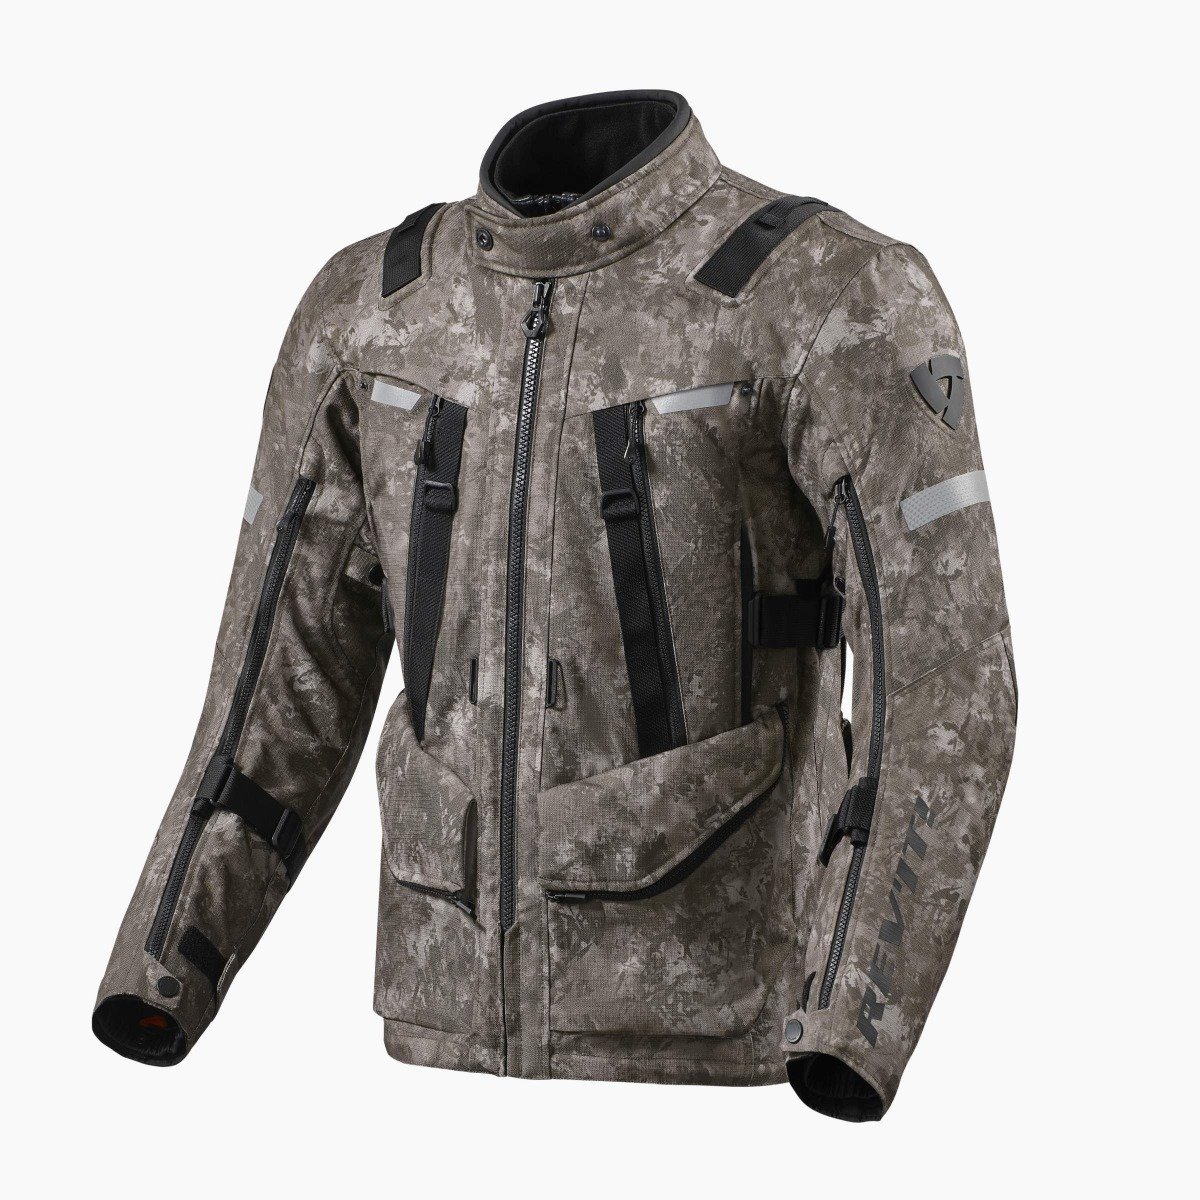 Image of REV'IT! Sand 4 H2O Jacket Camo Brown Size S ID 8700001311373